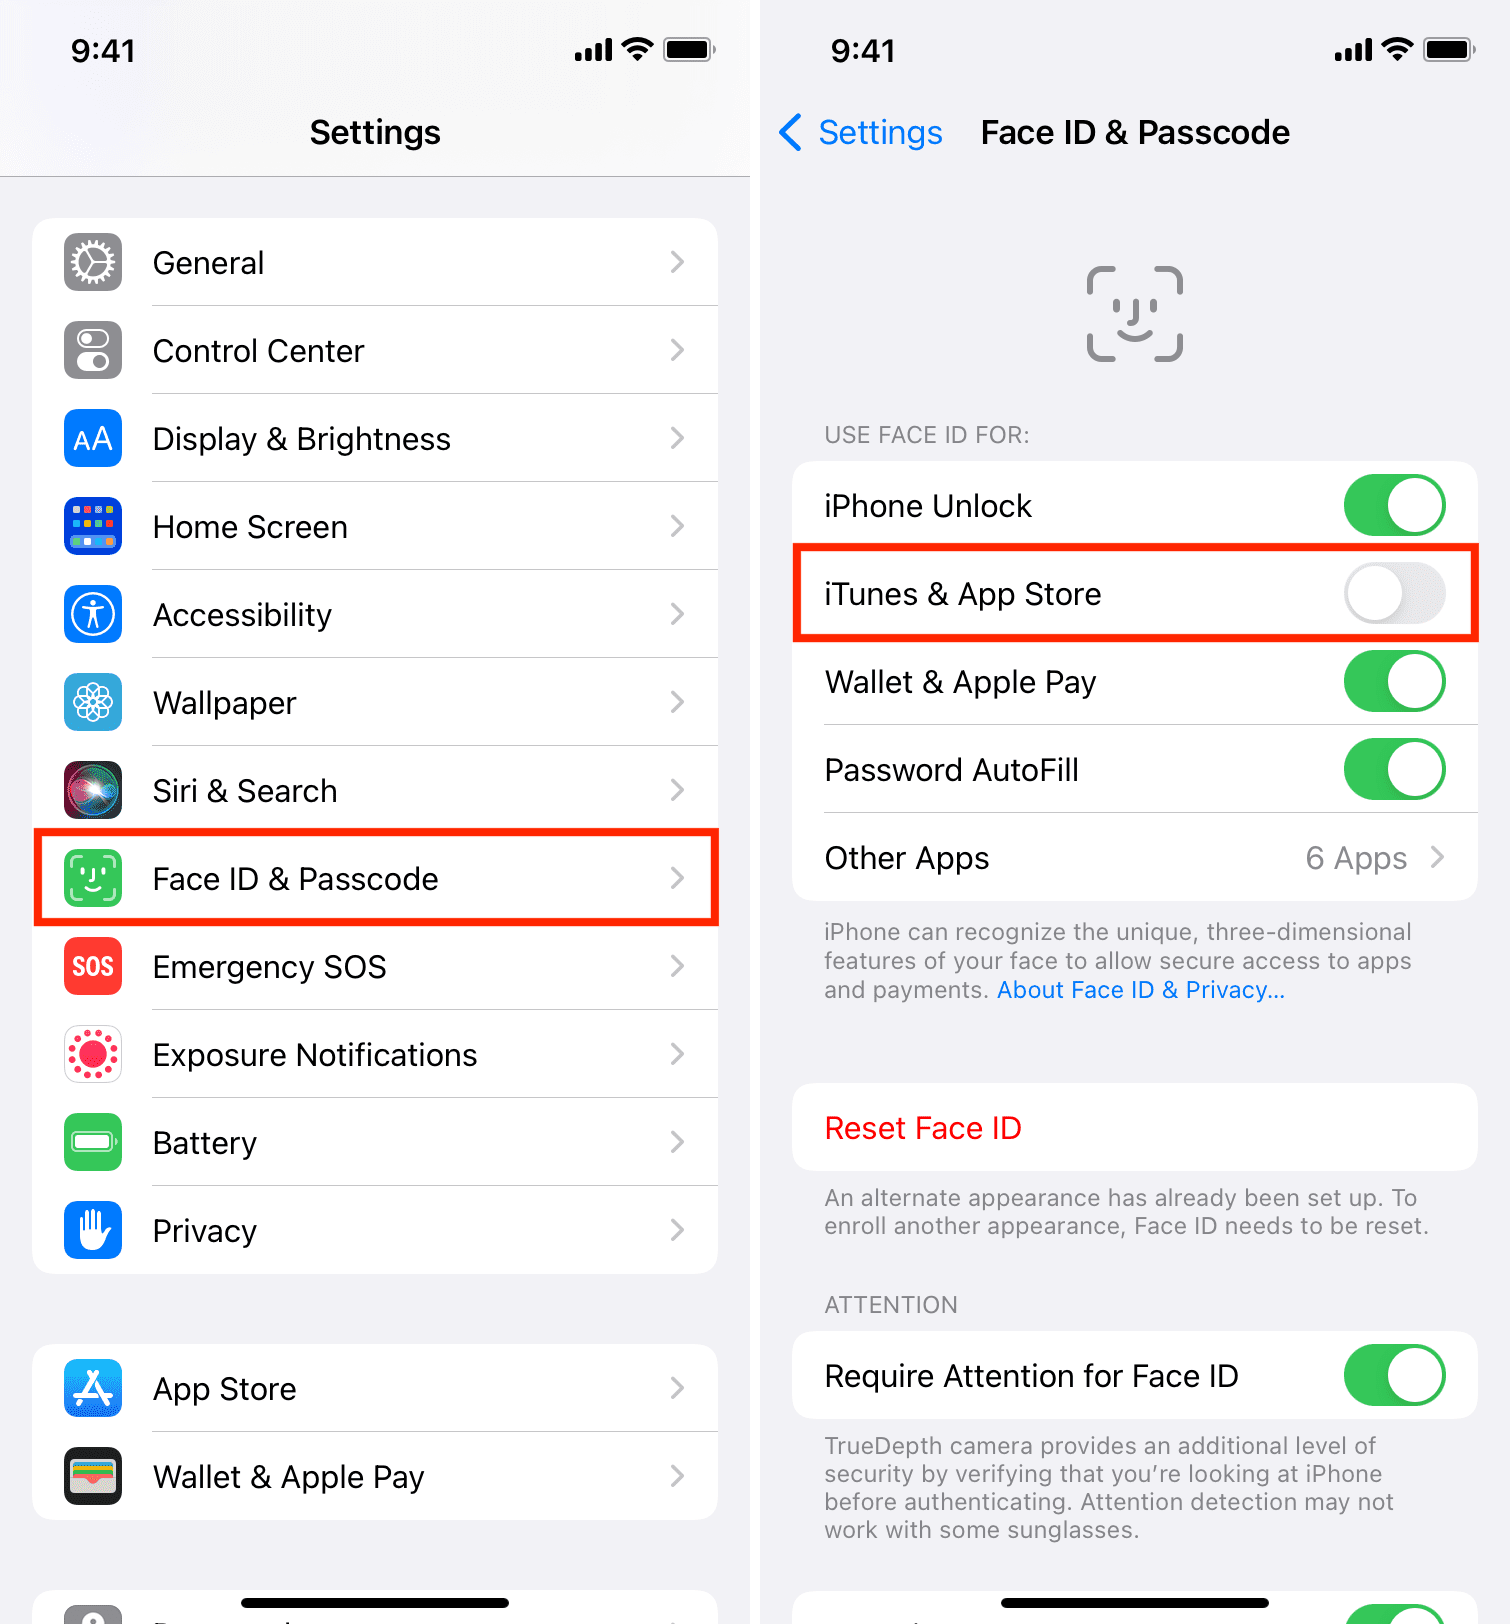 Turn off Face ID for App Store